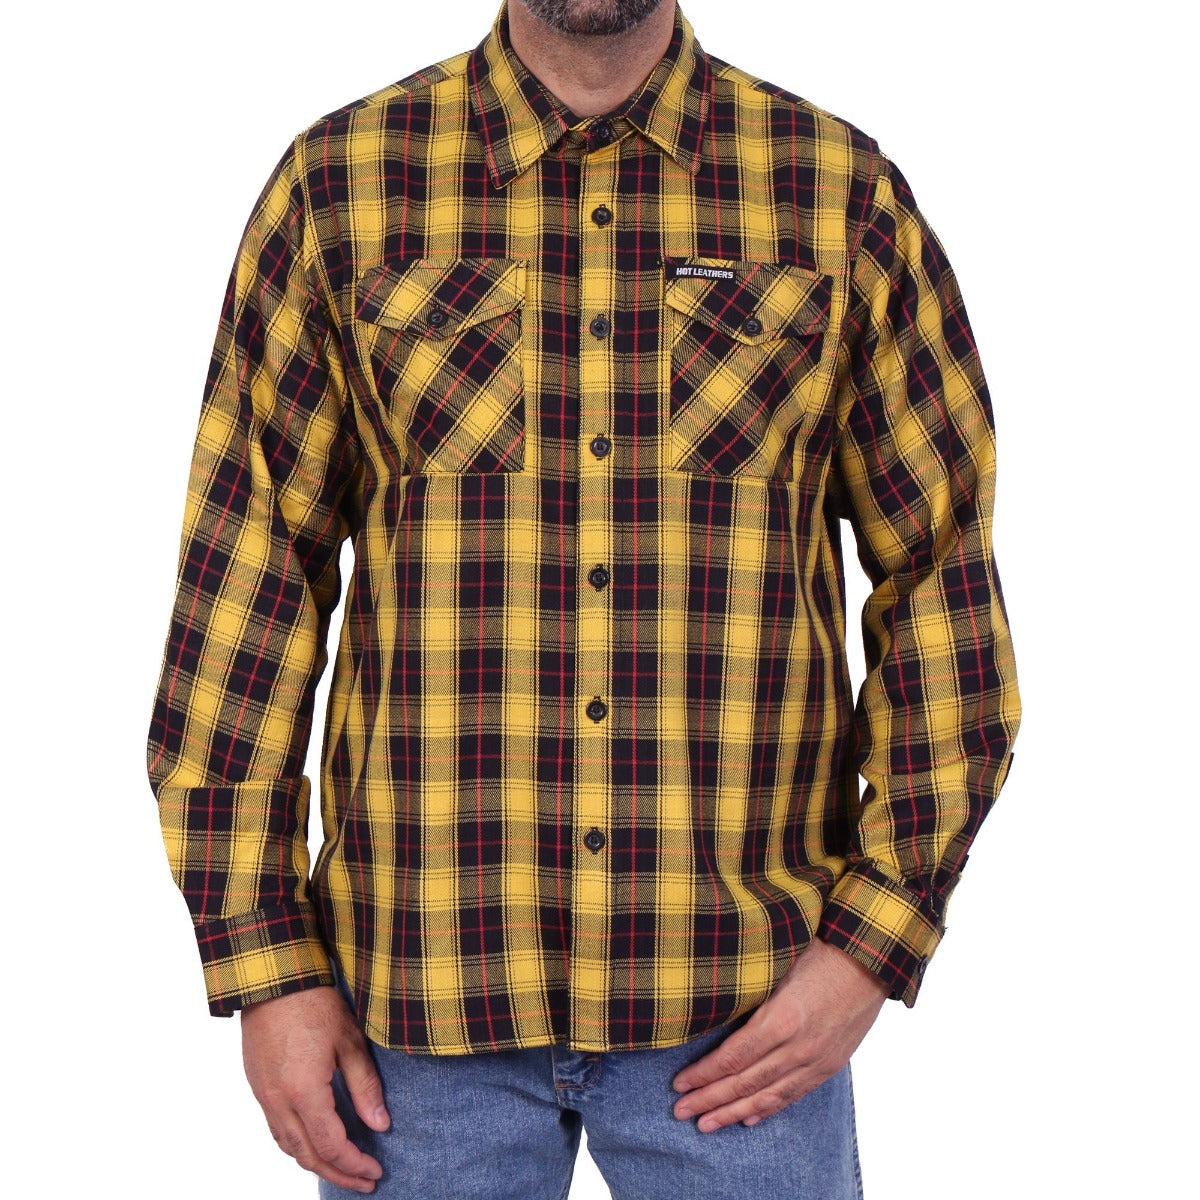 Hot Leathers Men's Yellow Red and Black Long Sleeve Flannel